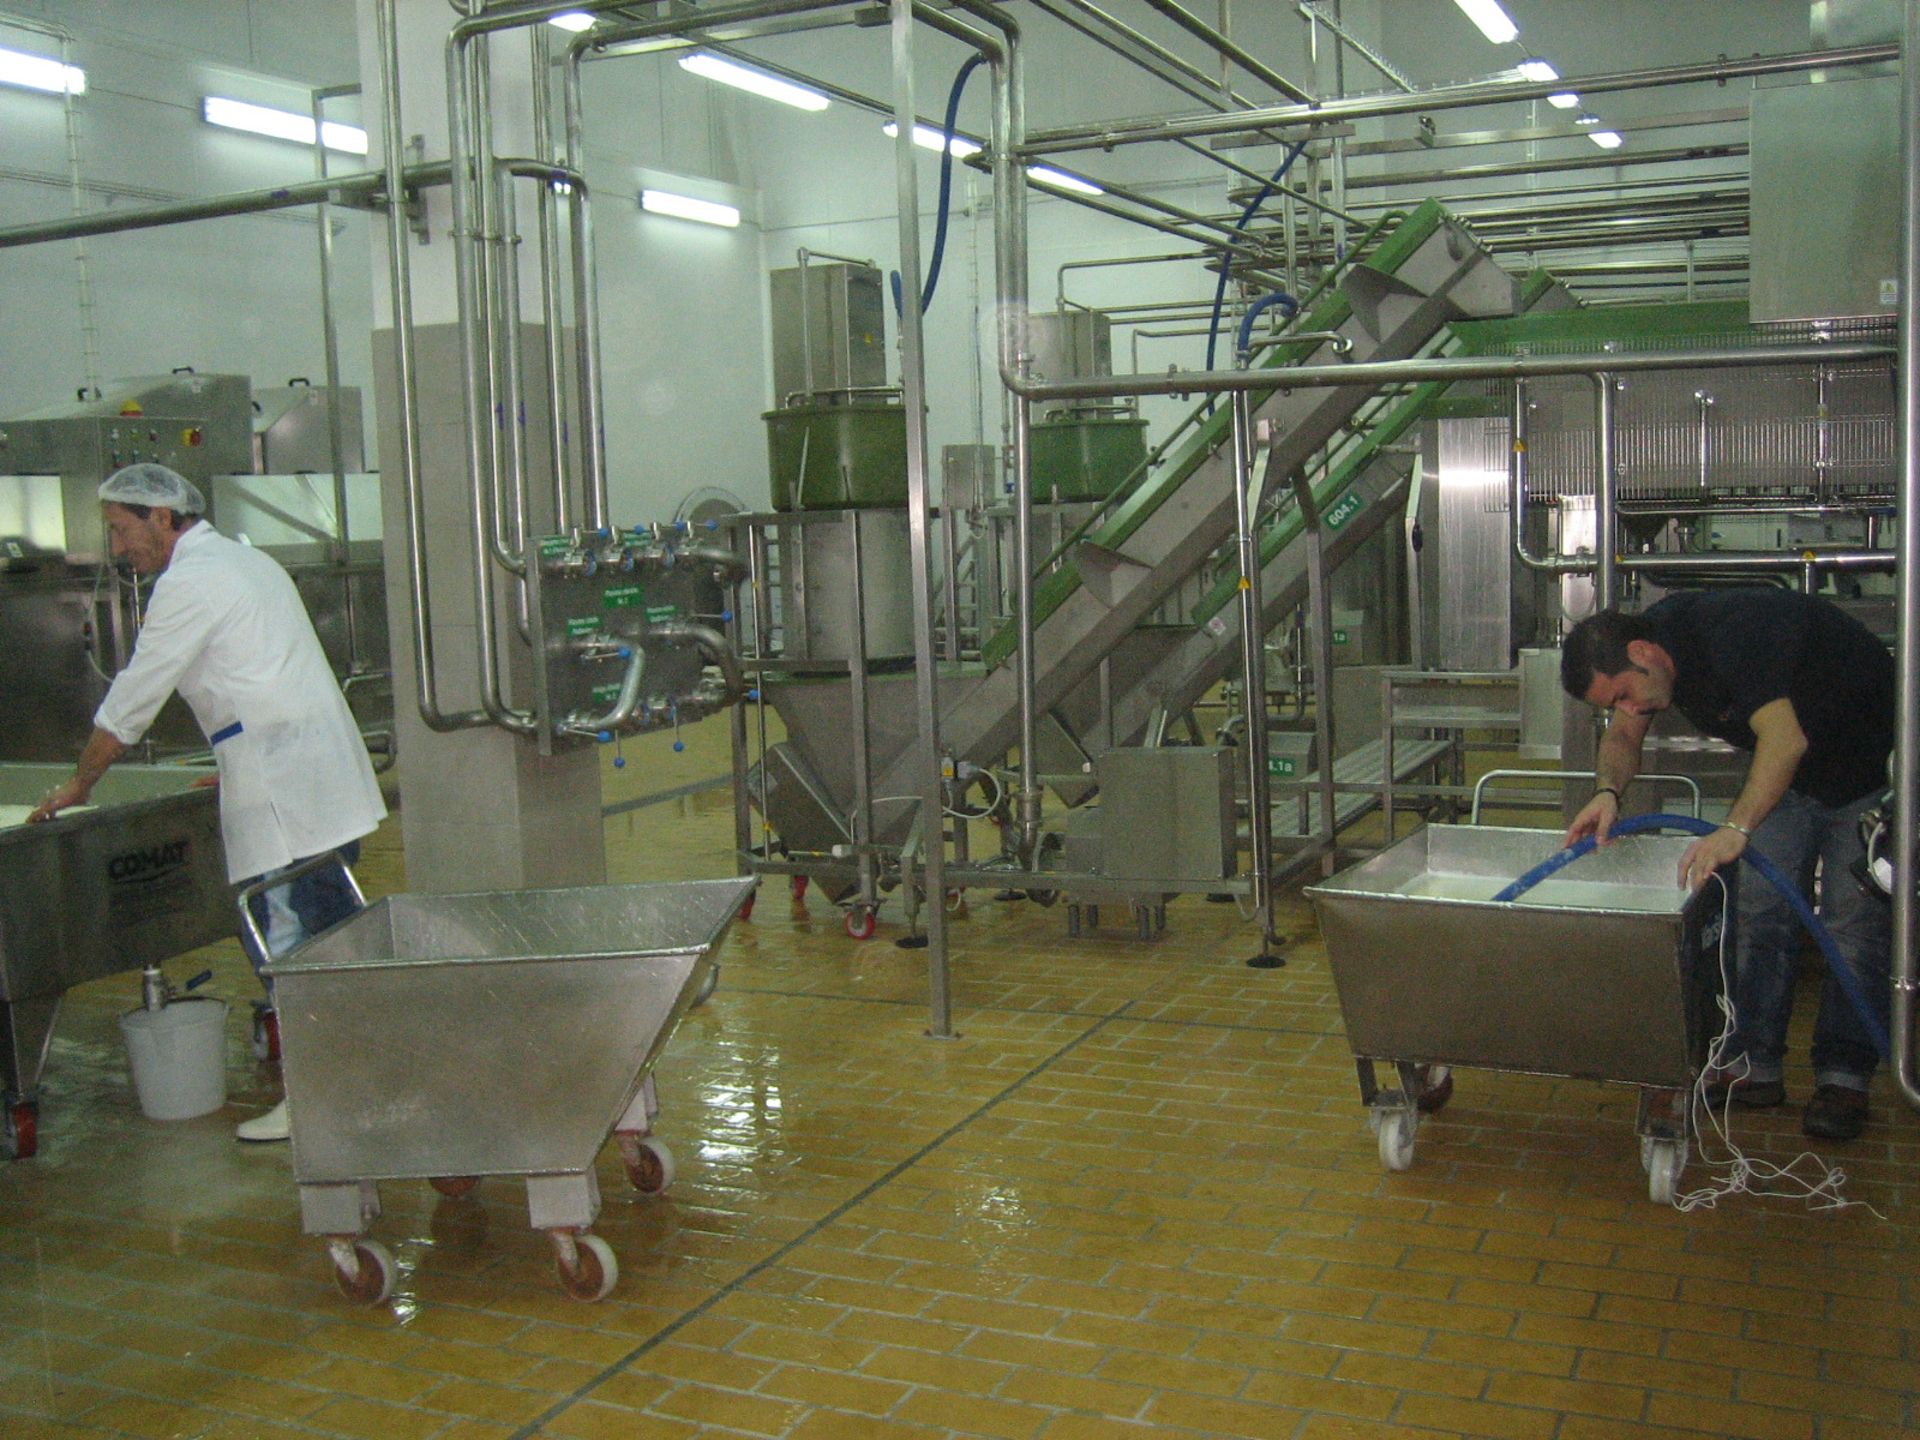 2X COMAT PROCESSING LINES FOR MOZZARELLA CHEESE TO PRODUCE MOZZARELLA STICKS AND MOZZARELLA BLOCKS. - Image 3 of 11